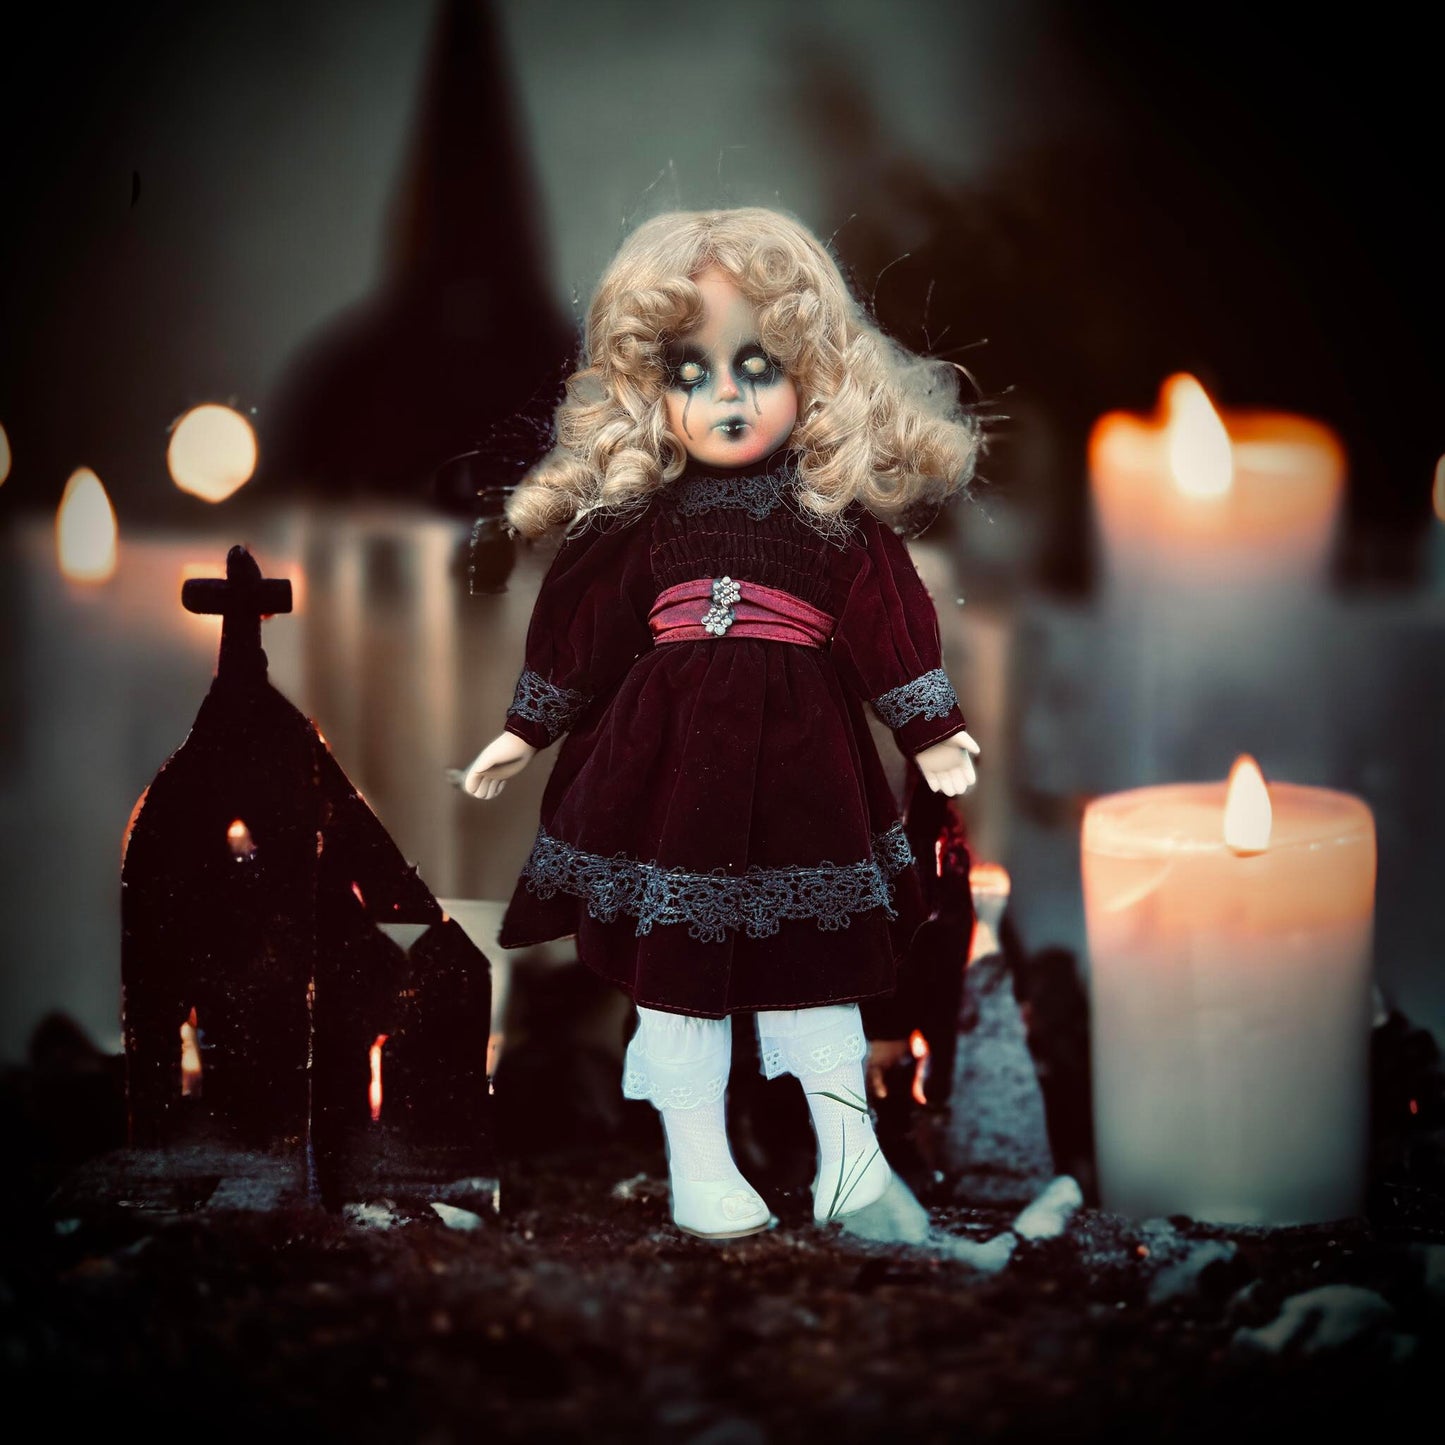 Meet Lynette 14" Doll Porcelain Witchy Creepy Haunted Spirit Infected Scary Poltergeist Spooky Zombie Possessed Fall Gothic Positive Energy